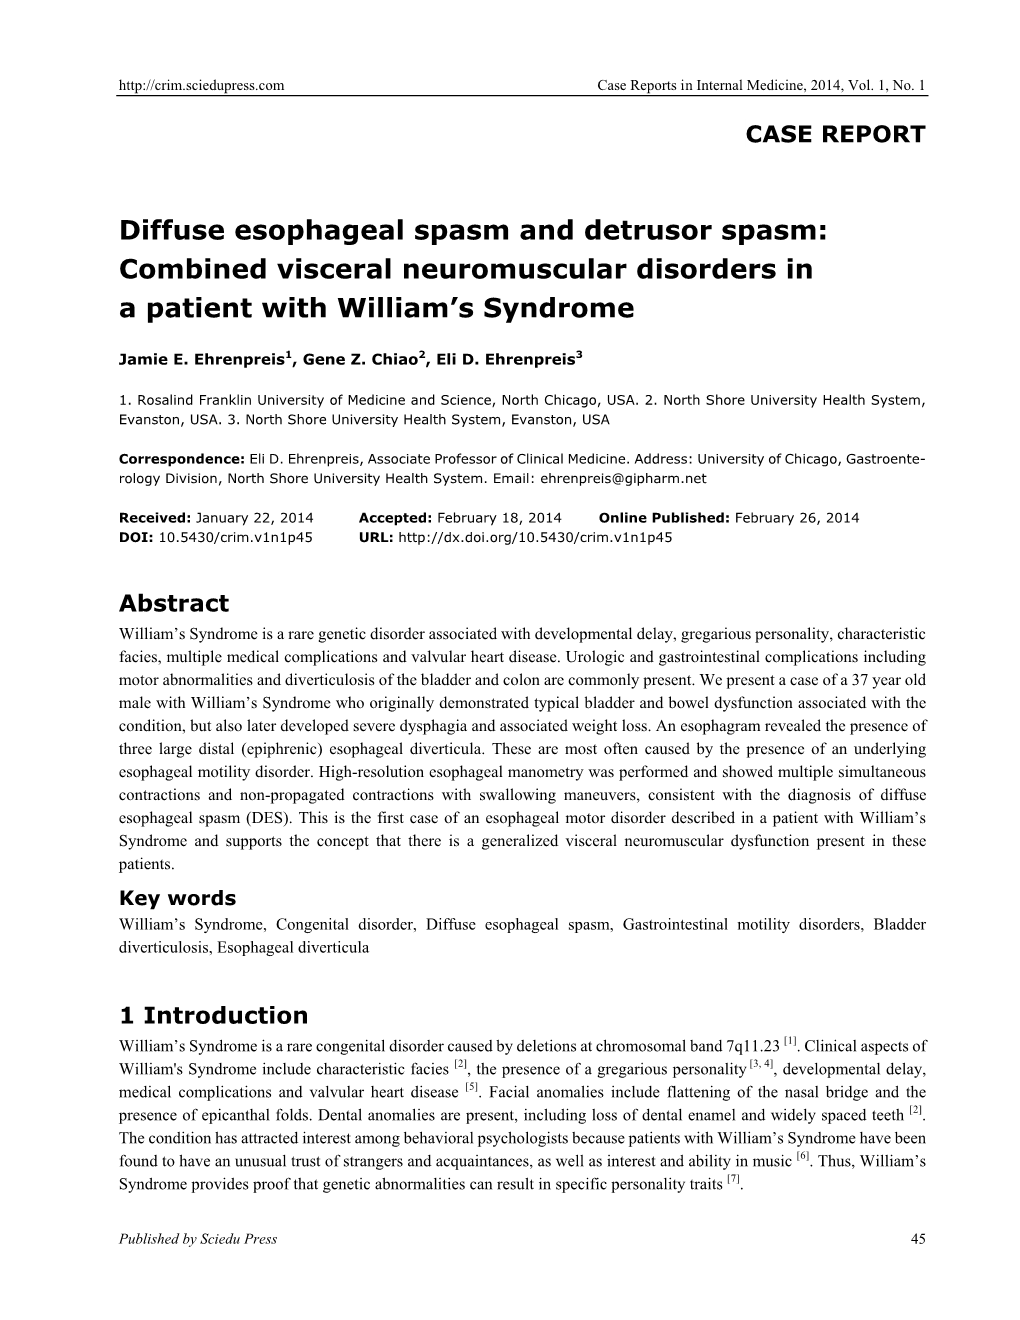 Diffuse Esophageal Spasm and Detrusor Spasm: Combined Visceral Neuromuscular Disorders in a Patient with William’S Syndrome